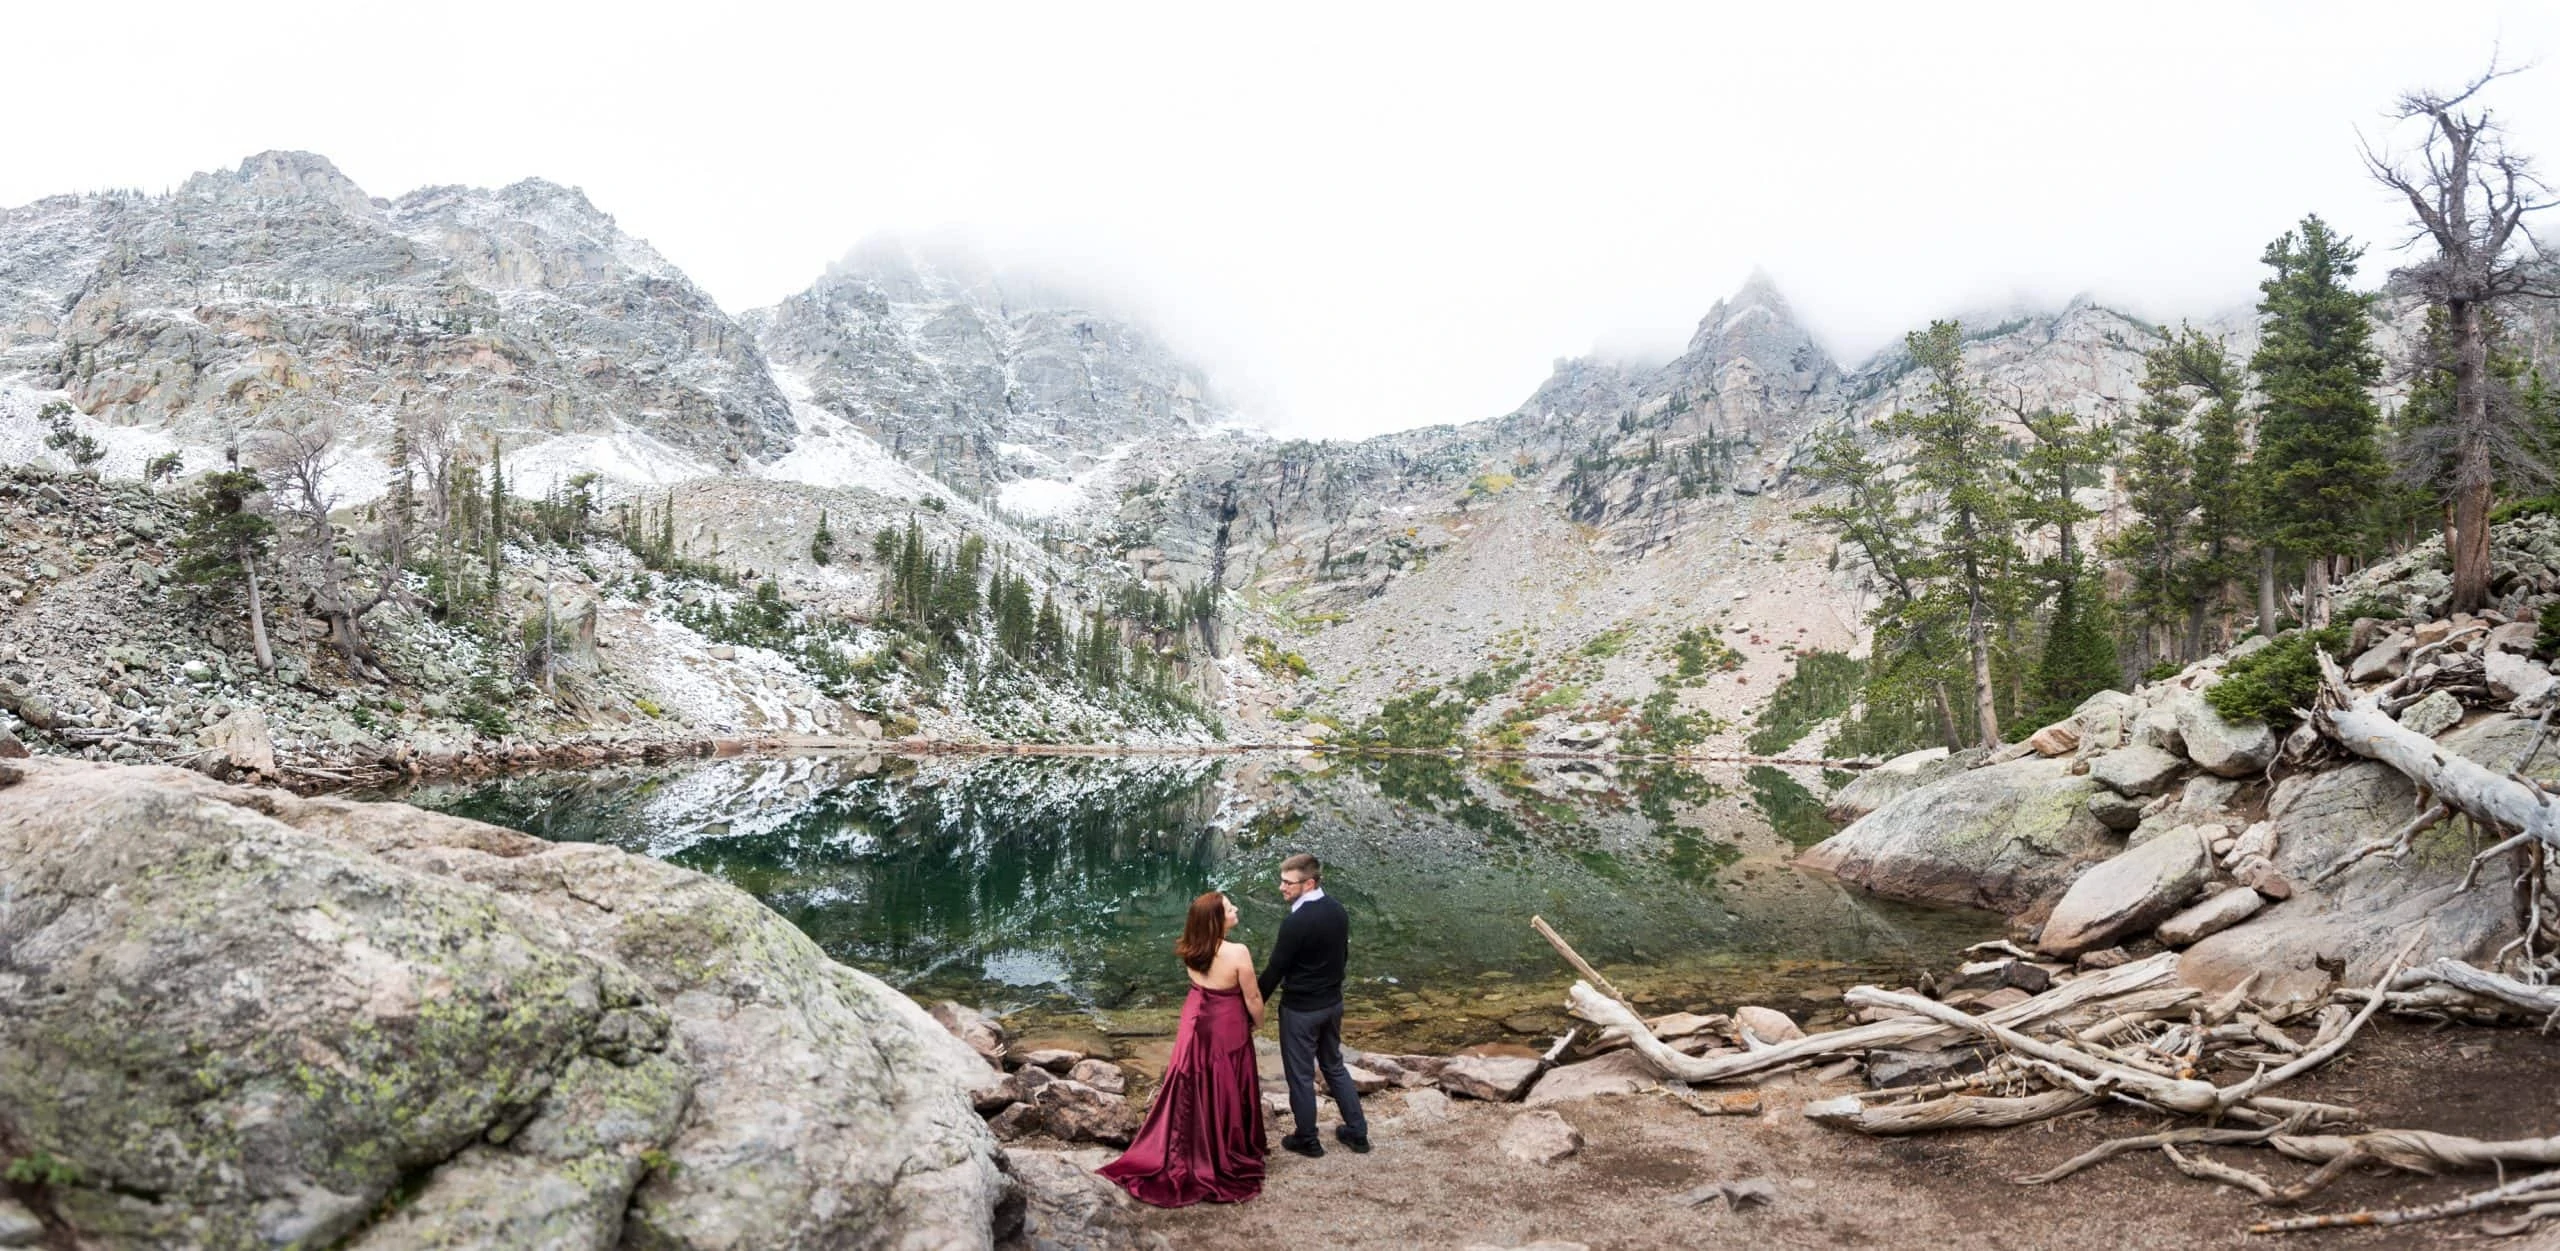 An engagement photo at emerald lake in Rocky Mountain National Park.